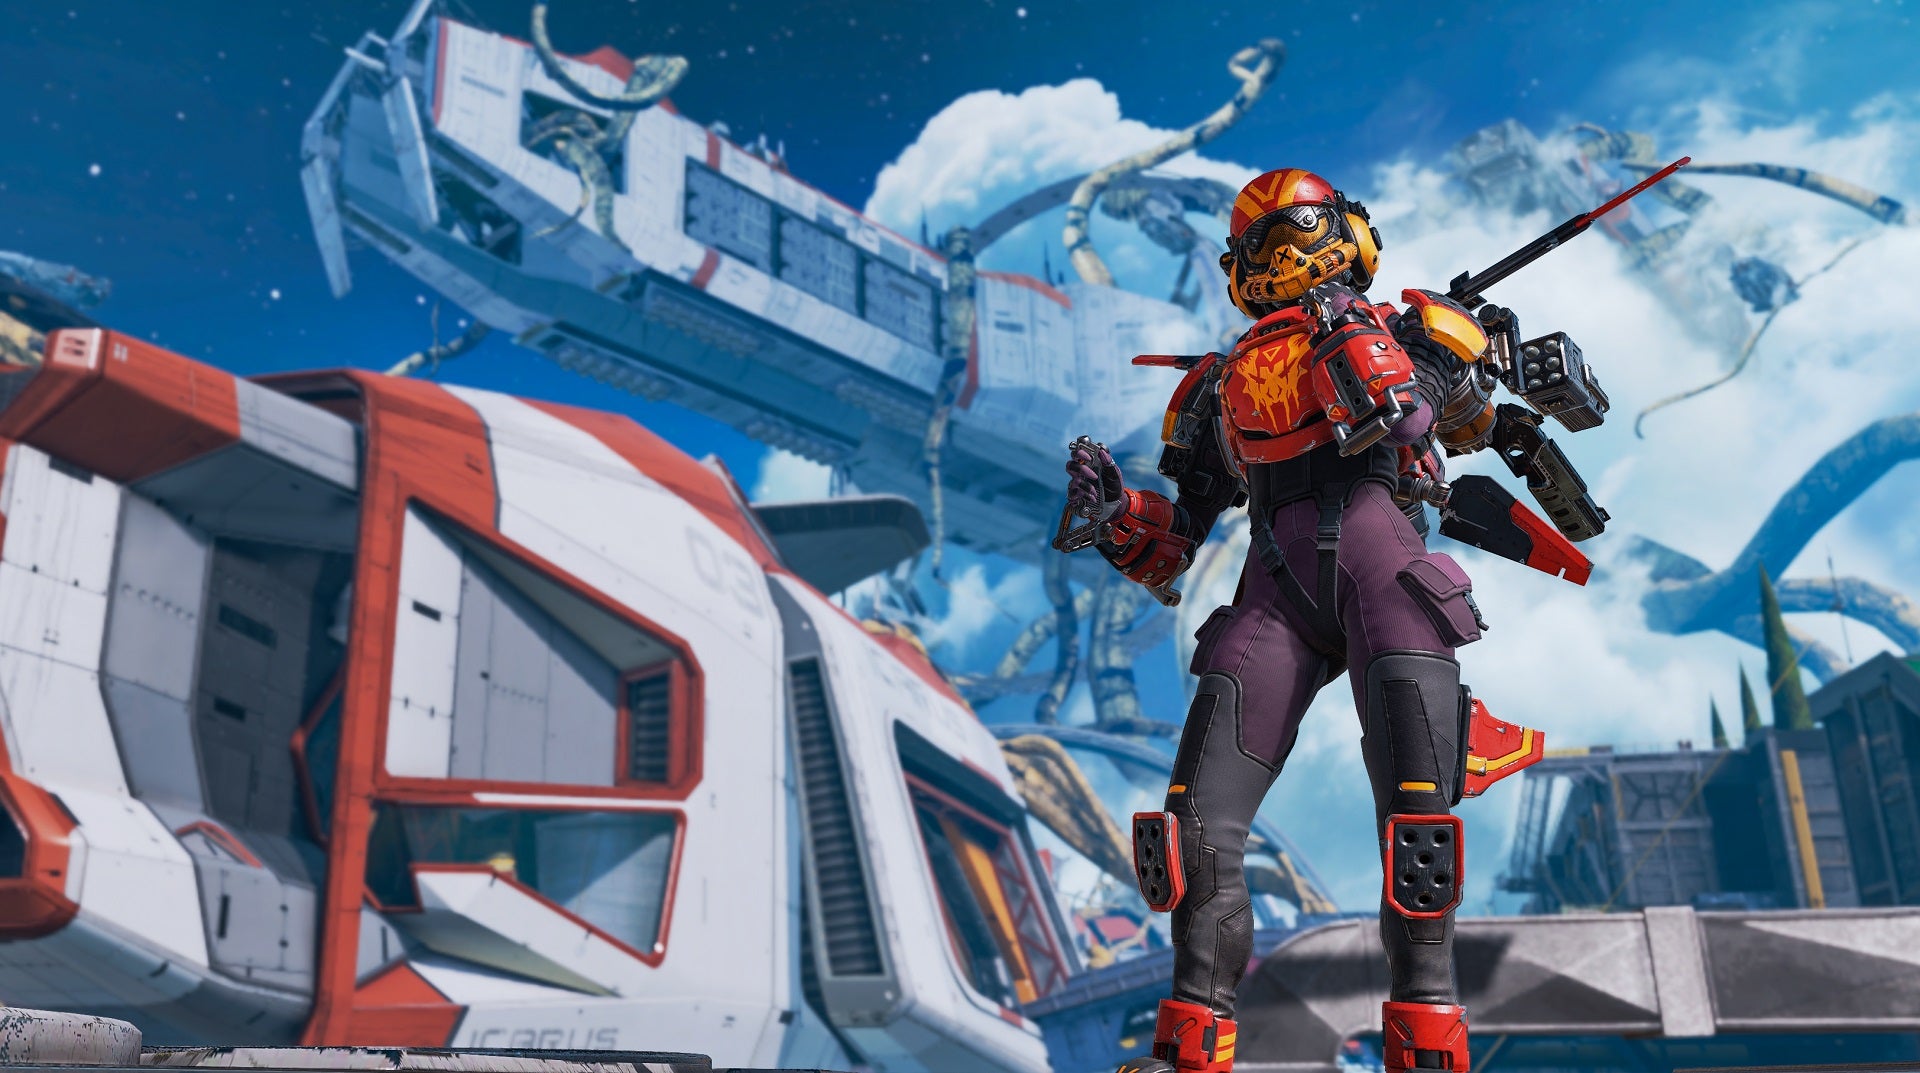 Apex Legends' Valkyrie sporting a nice orange helmet in front of some overrun ships on Olypmus (overrun with parasitc plants).